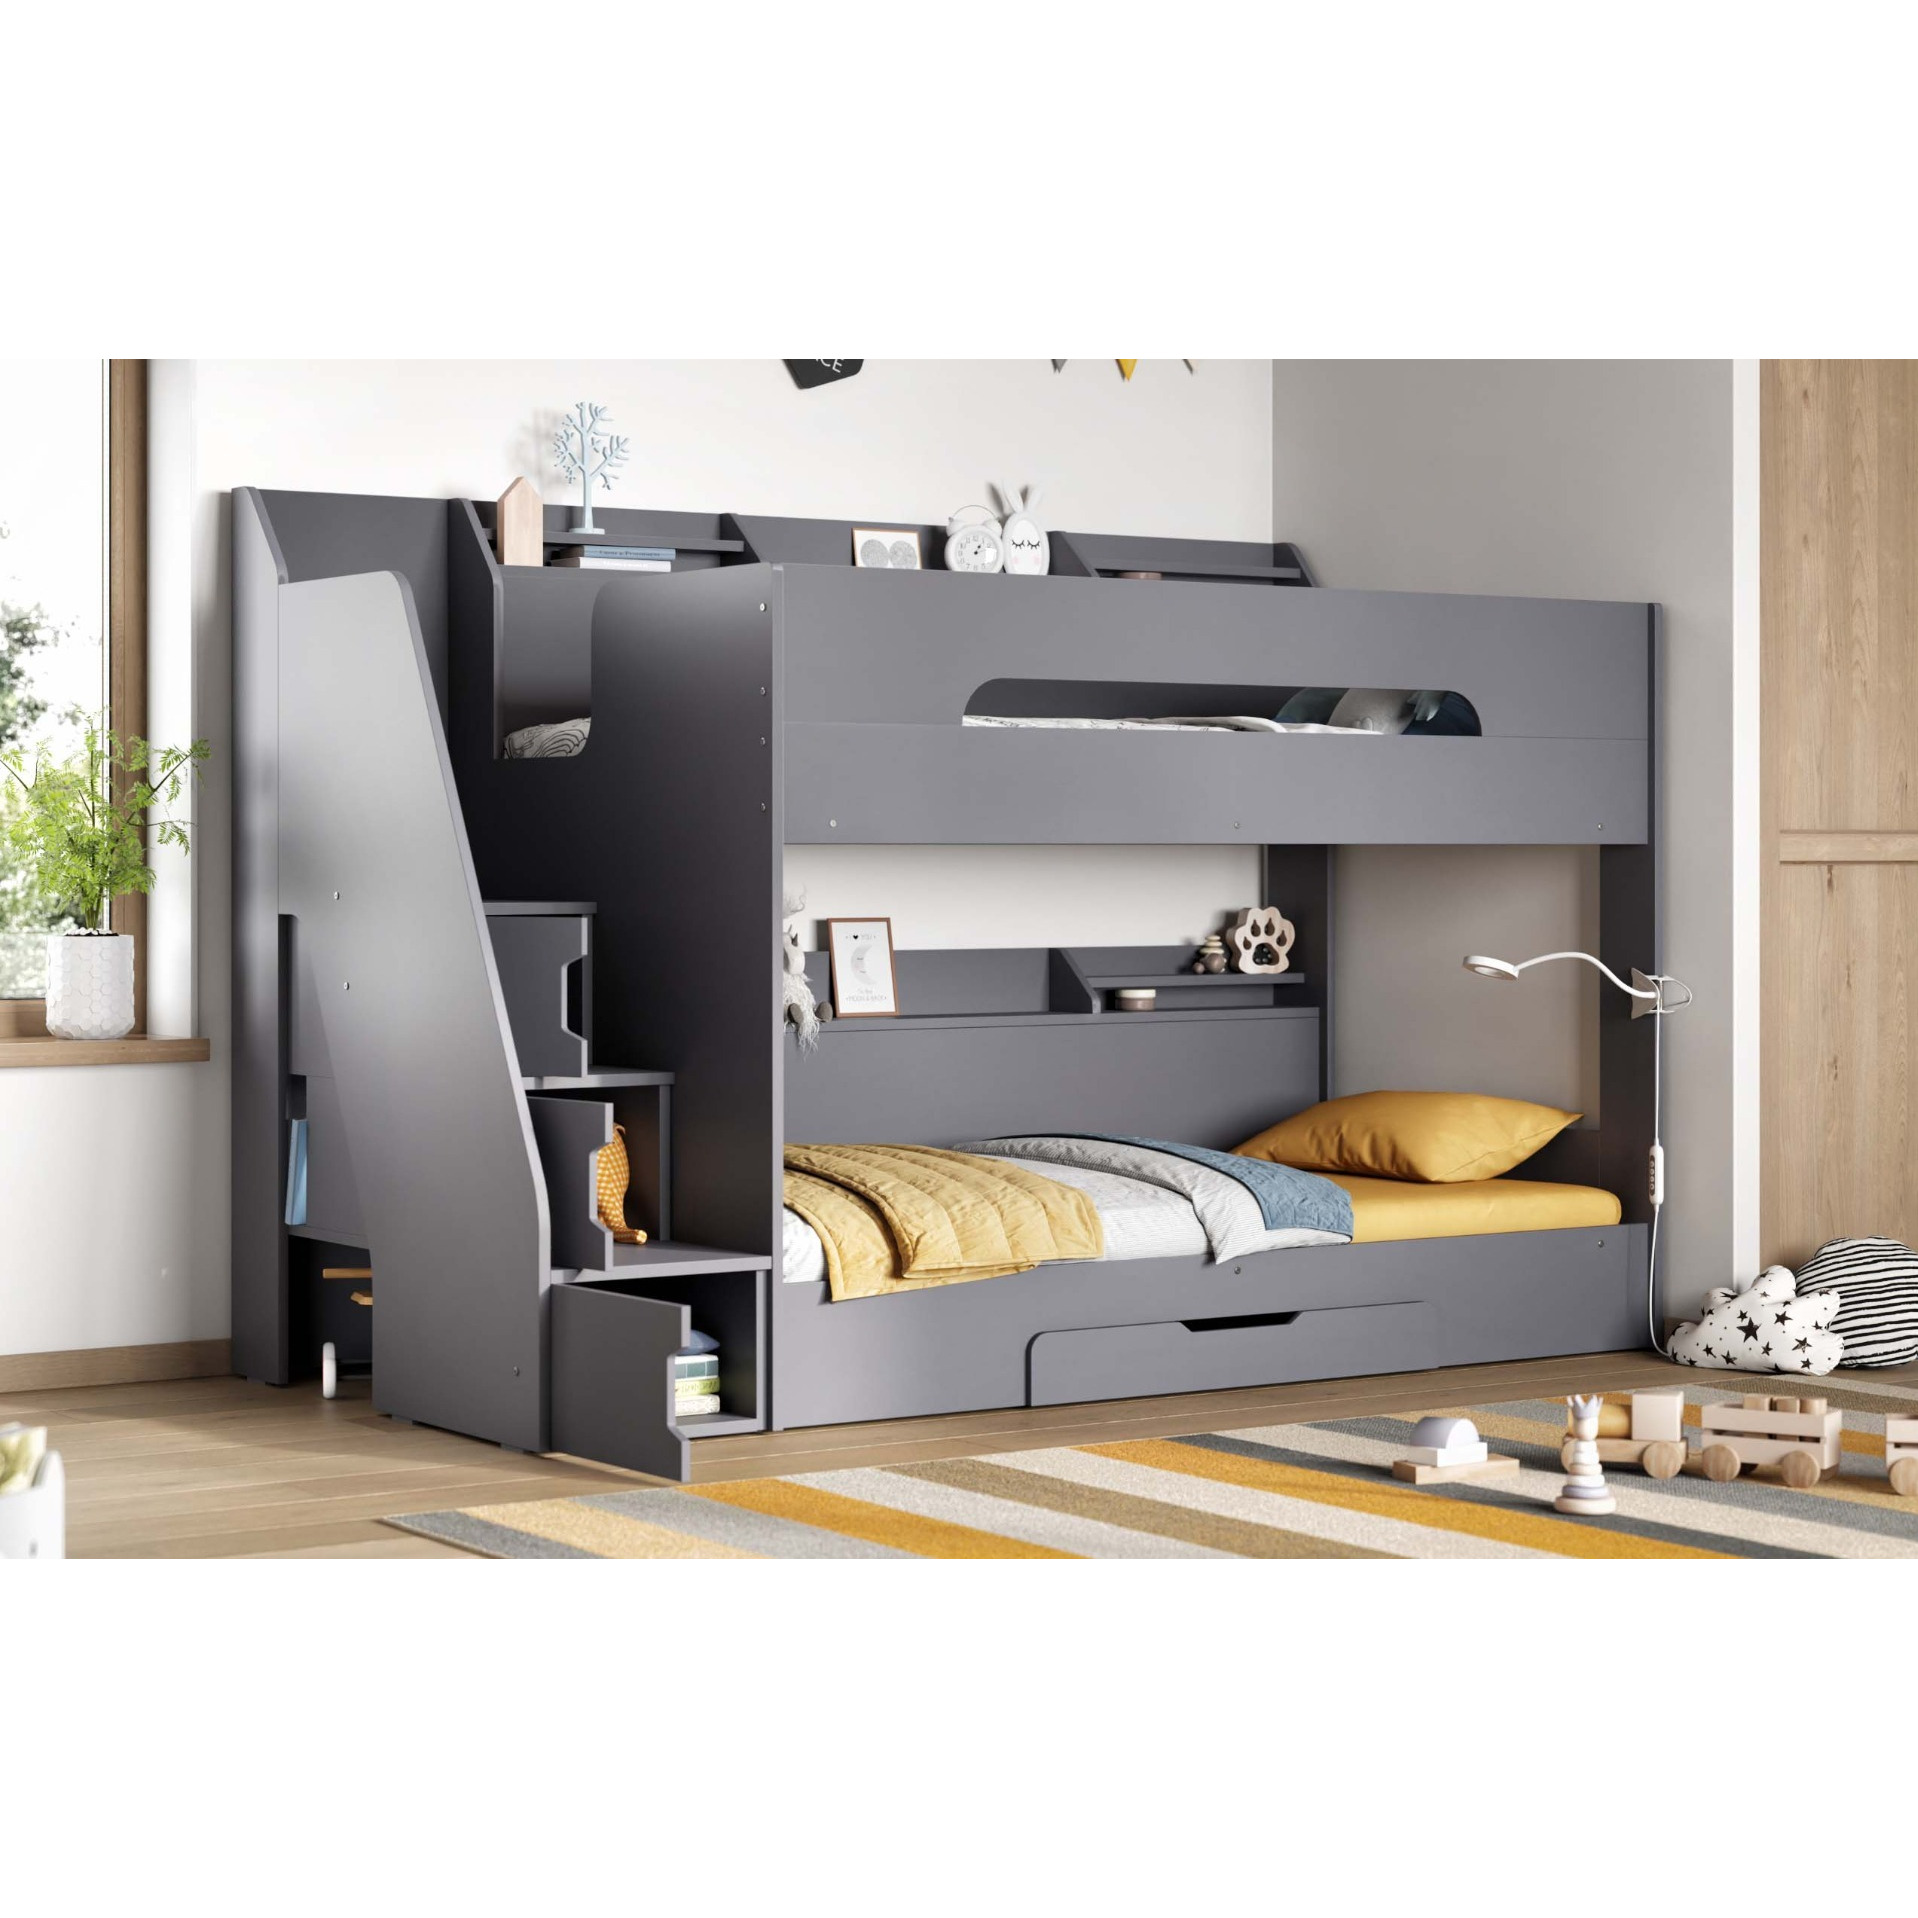 Flair Slick Staircase Bunk Bed Grey With Storage - image 1